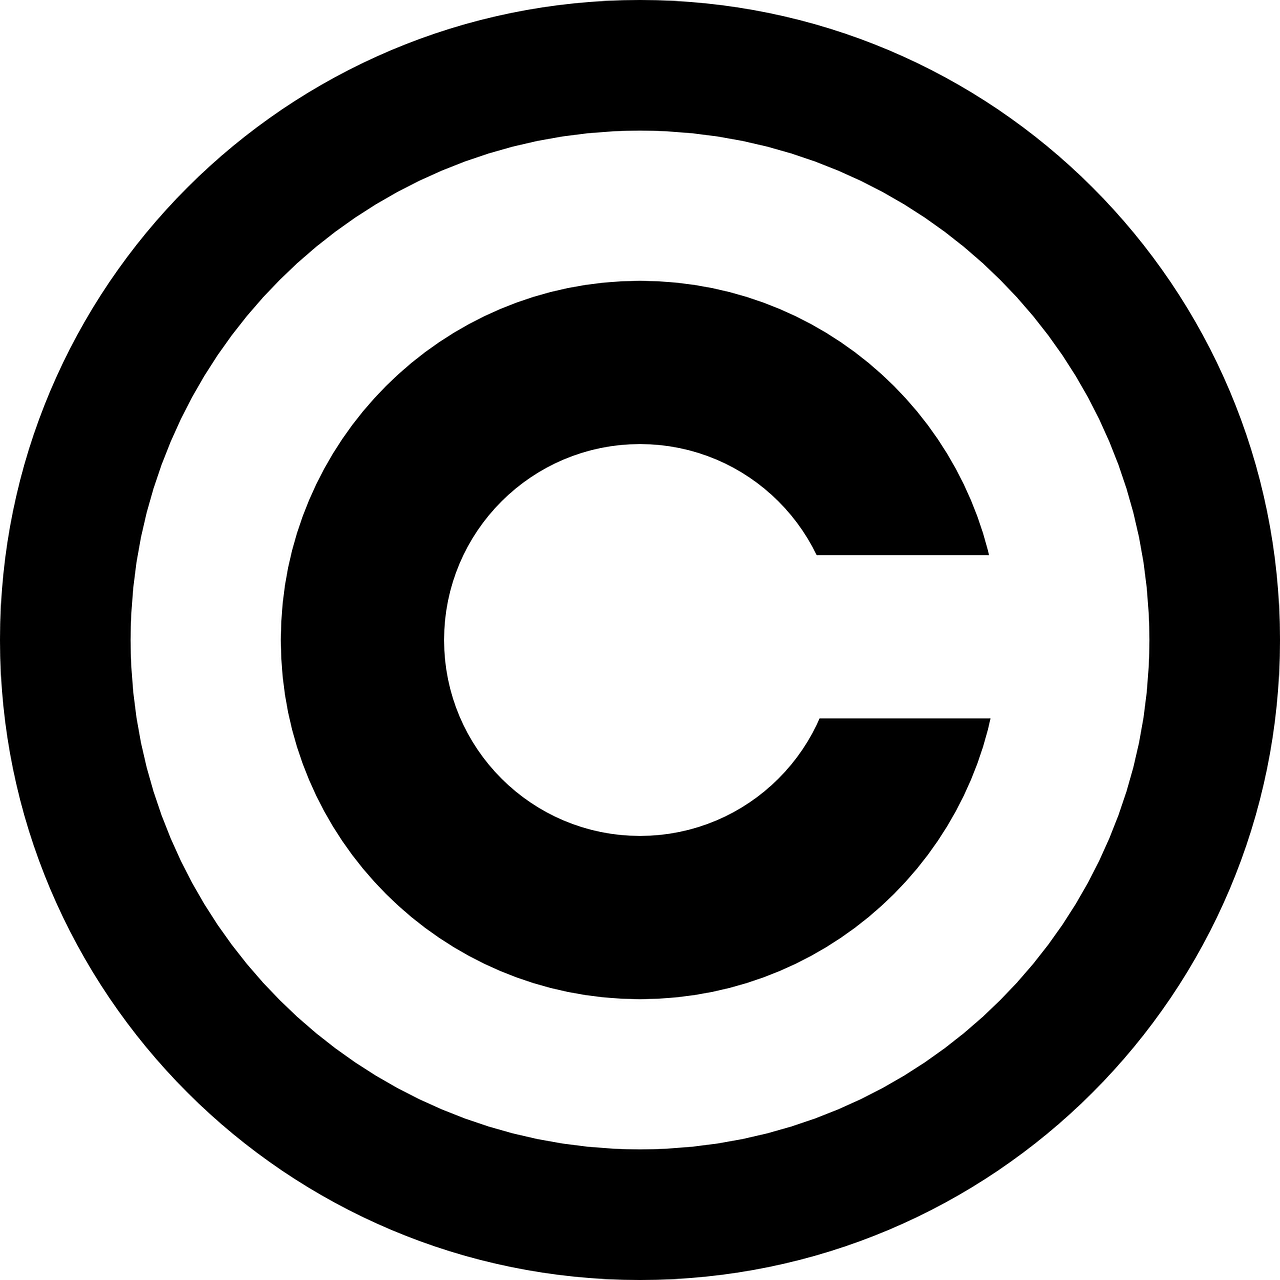 C Symbol Logo - The Story Of The Copyright Symbol - Whatiscopyright.org